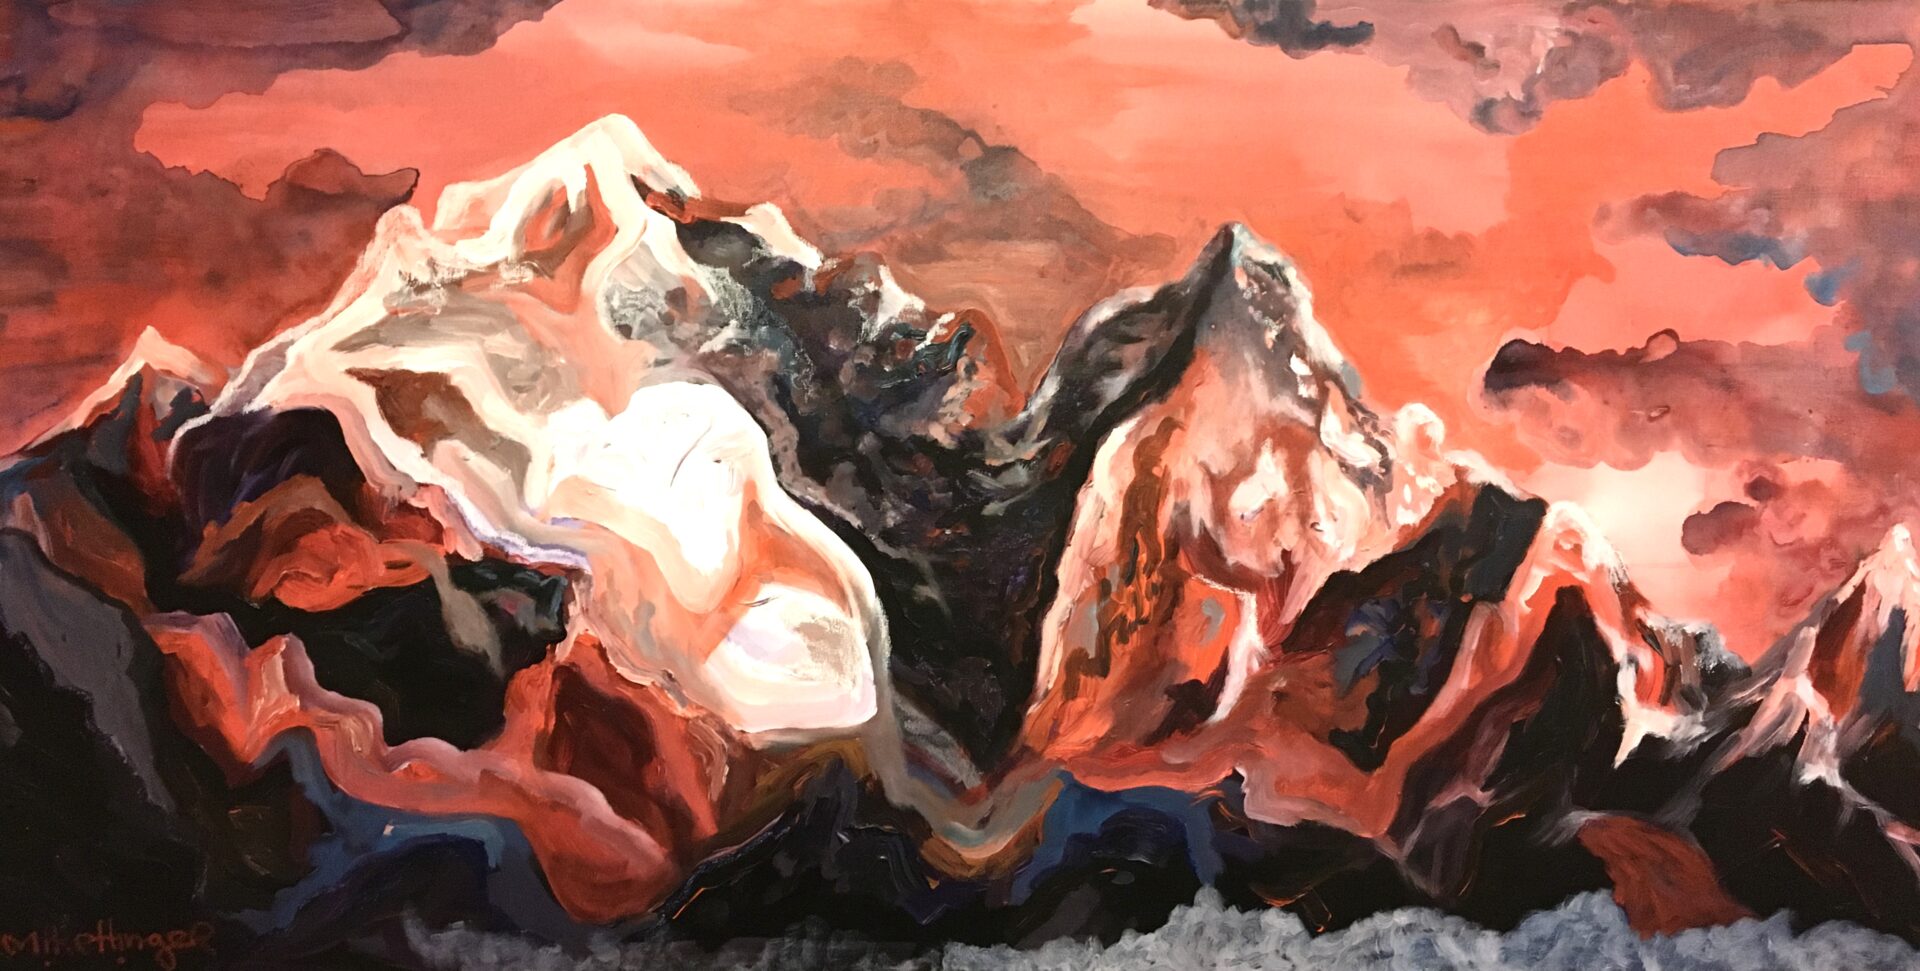 Beautiful oil painting of mountains